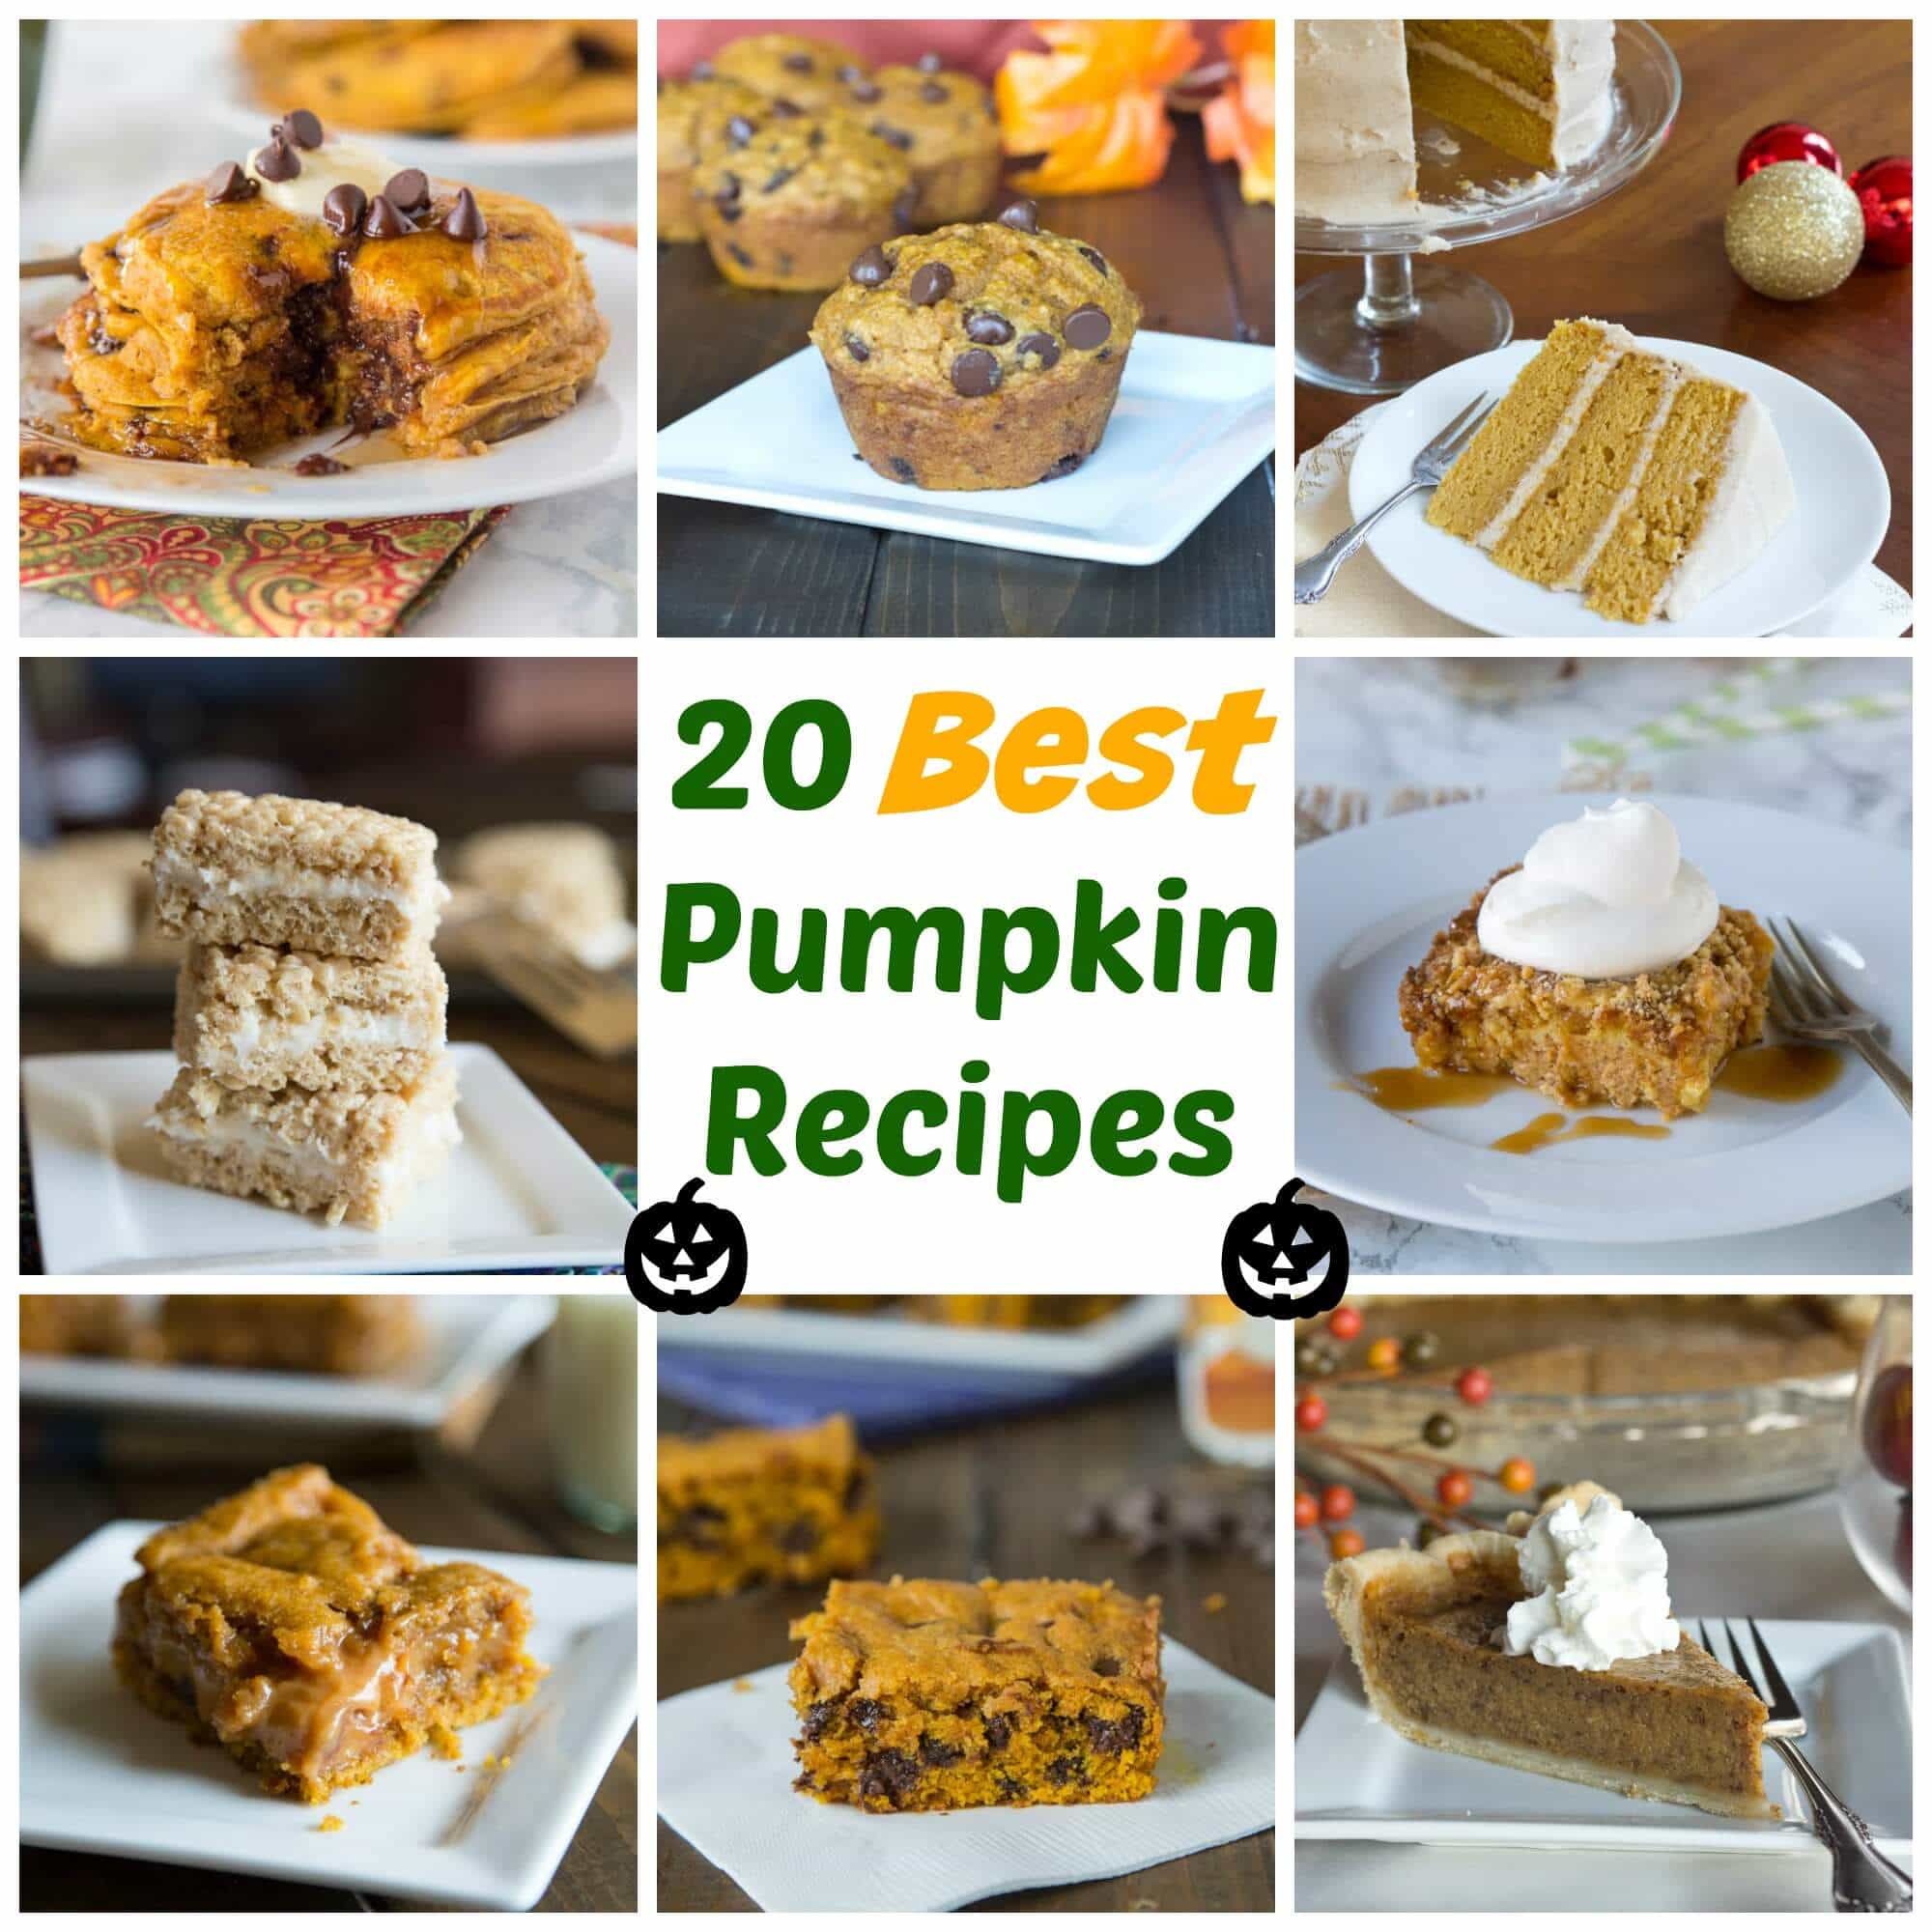 20 Pumpkin Recipes for Fall - Dinners, Dishes, and Desserts